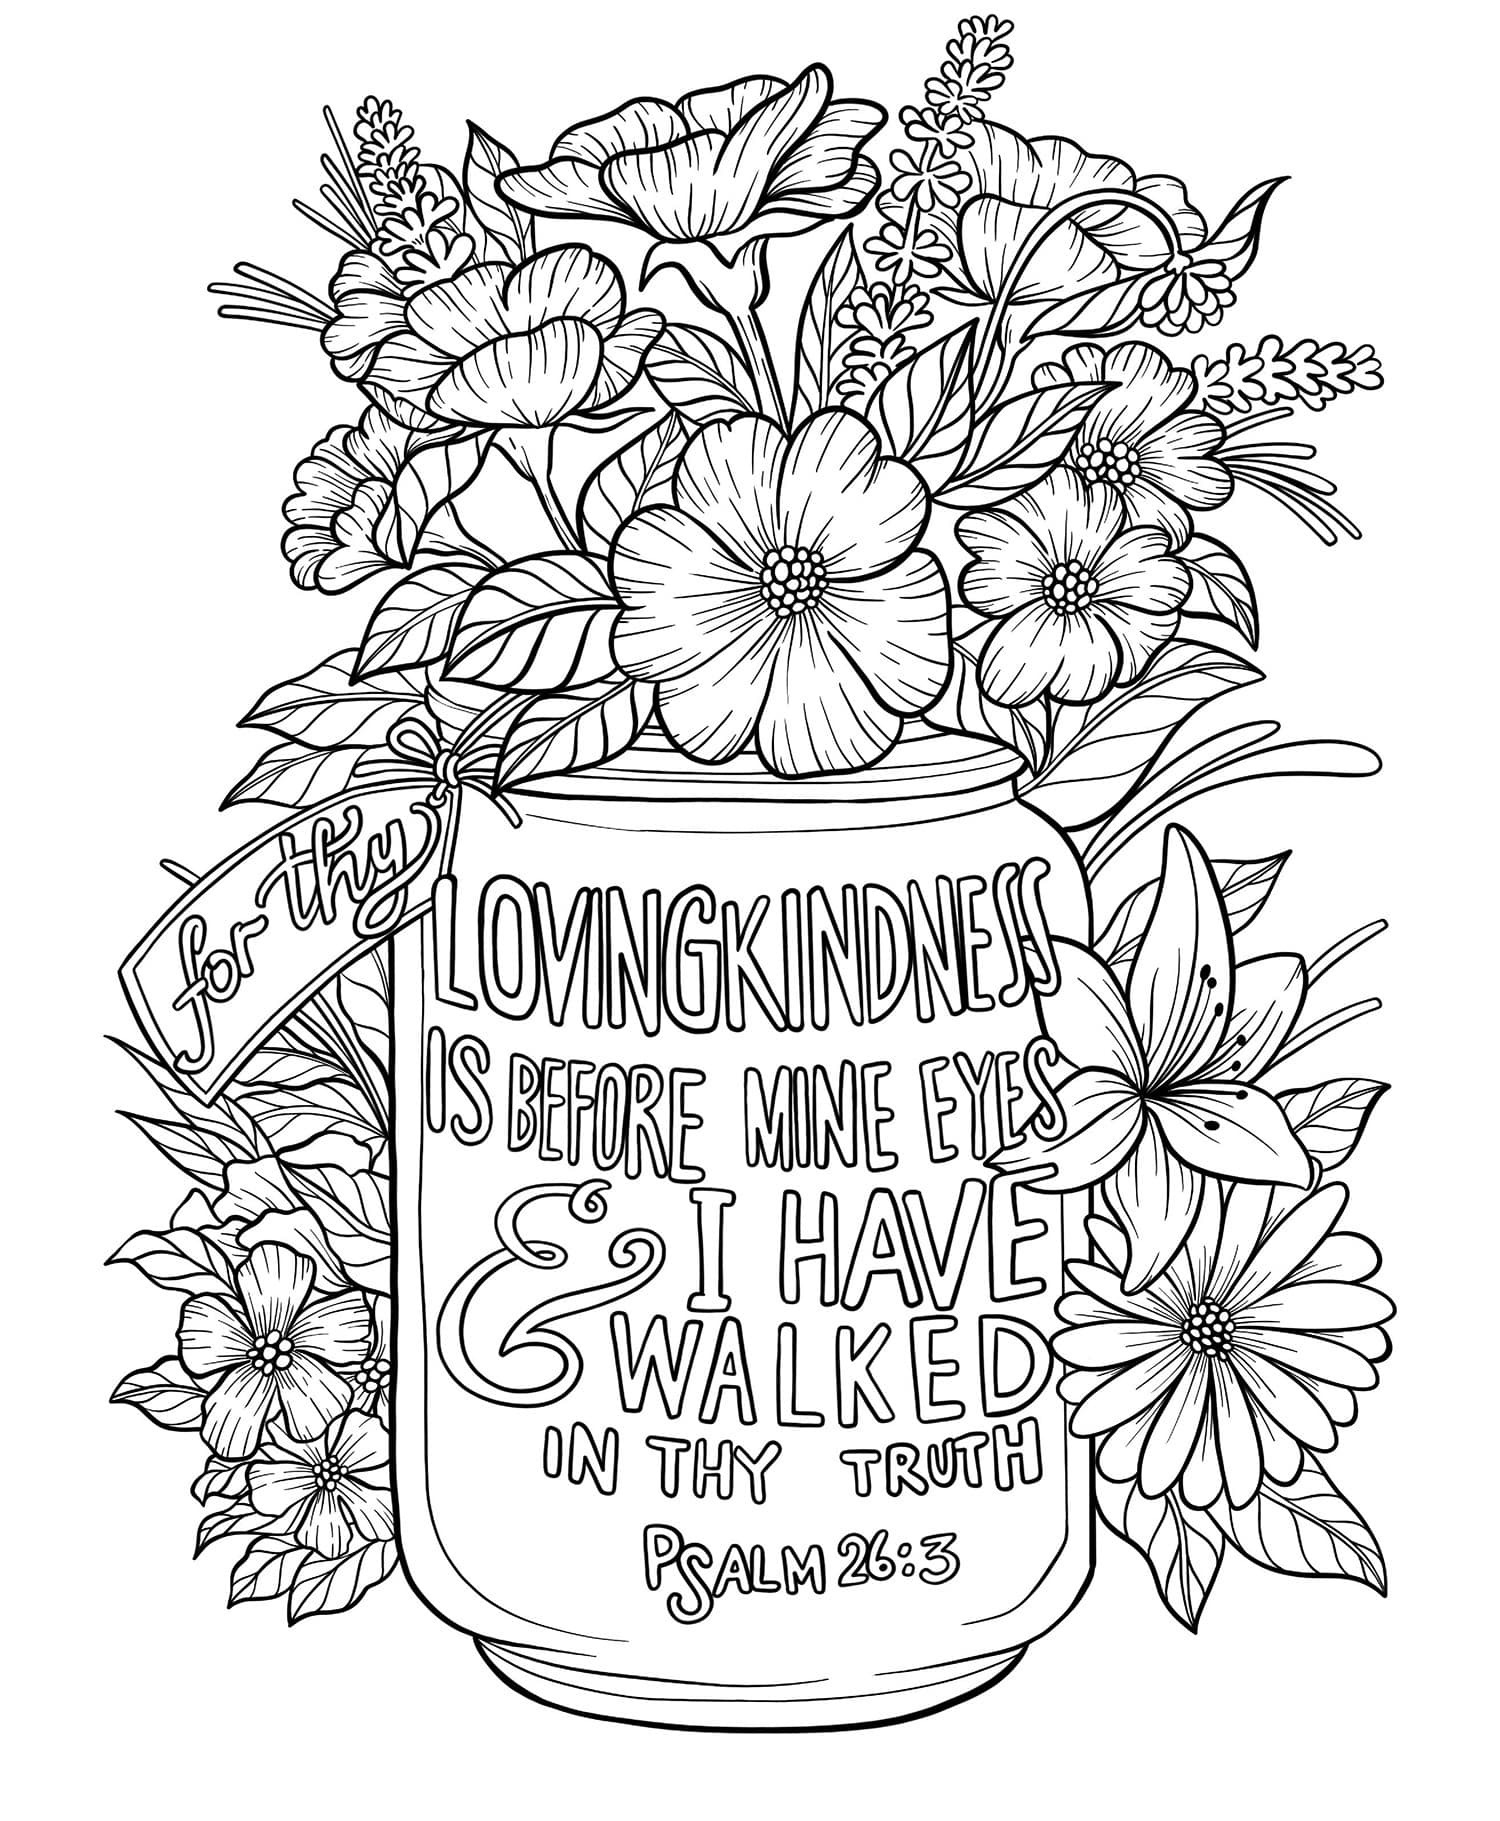 71 Coloring Pages Online For Adults Best Free - Coloring Pages Printable